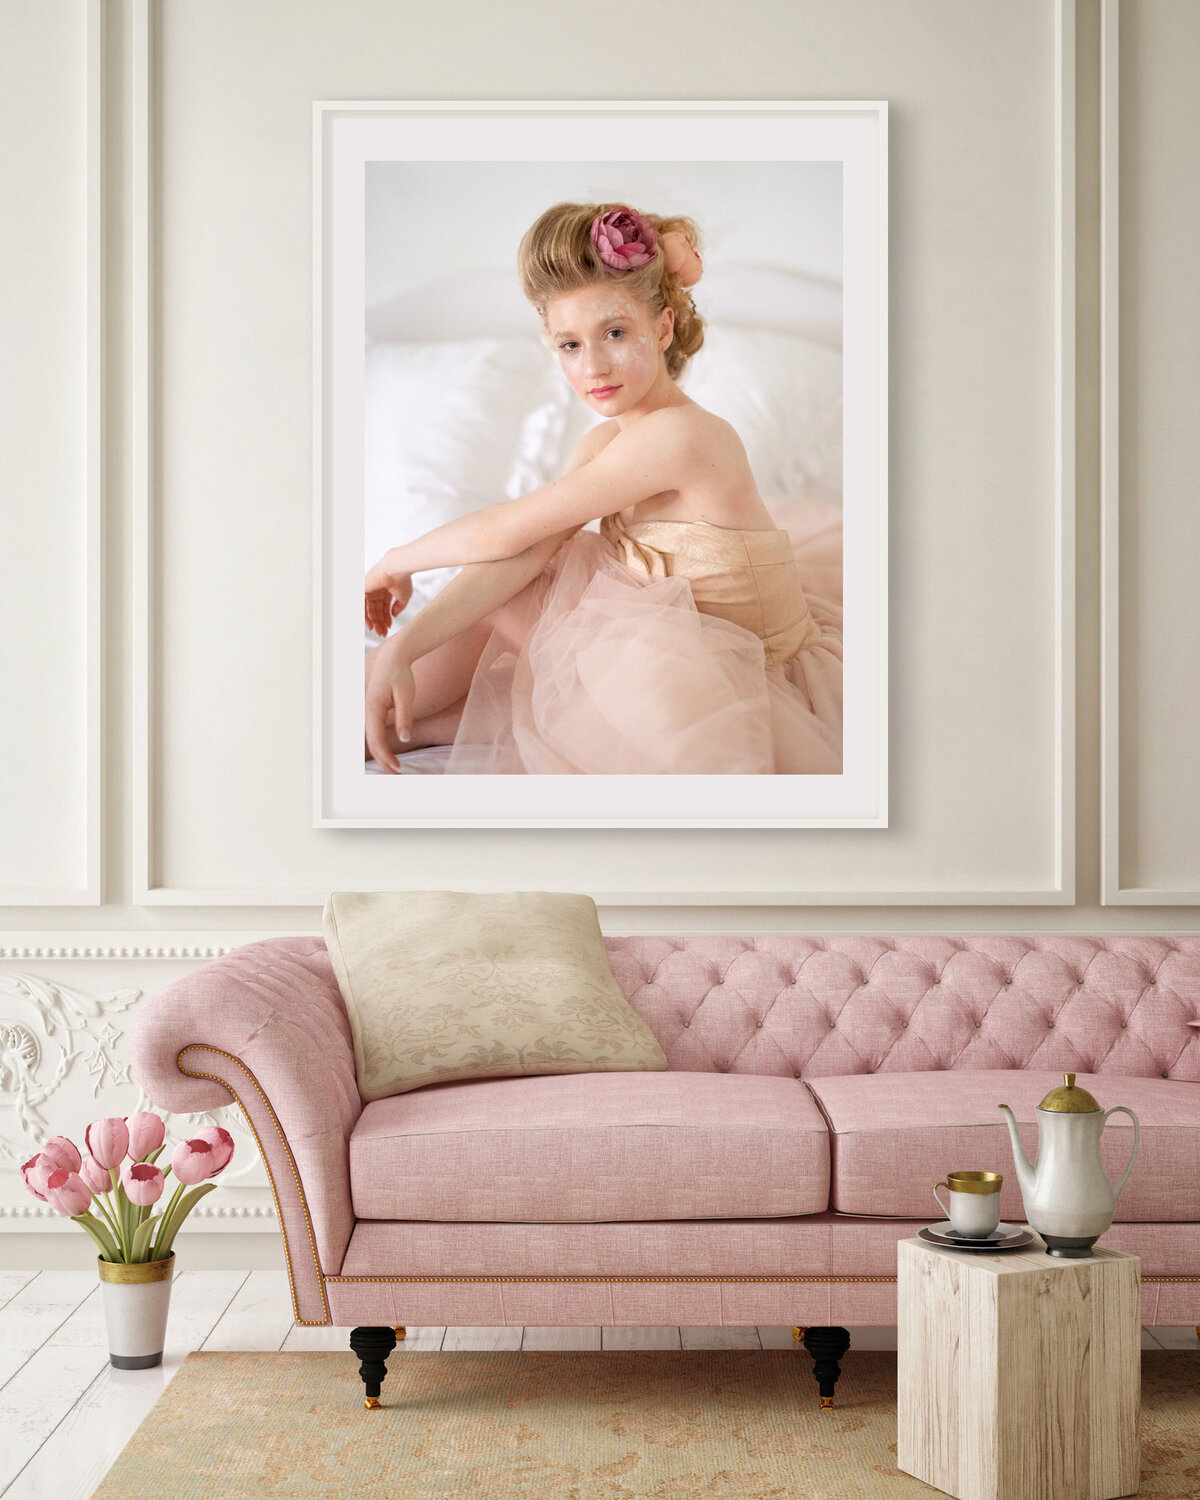 Austin Child  Portrait Photographer. Portrait of a ballerina in pink sitting on the bed.